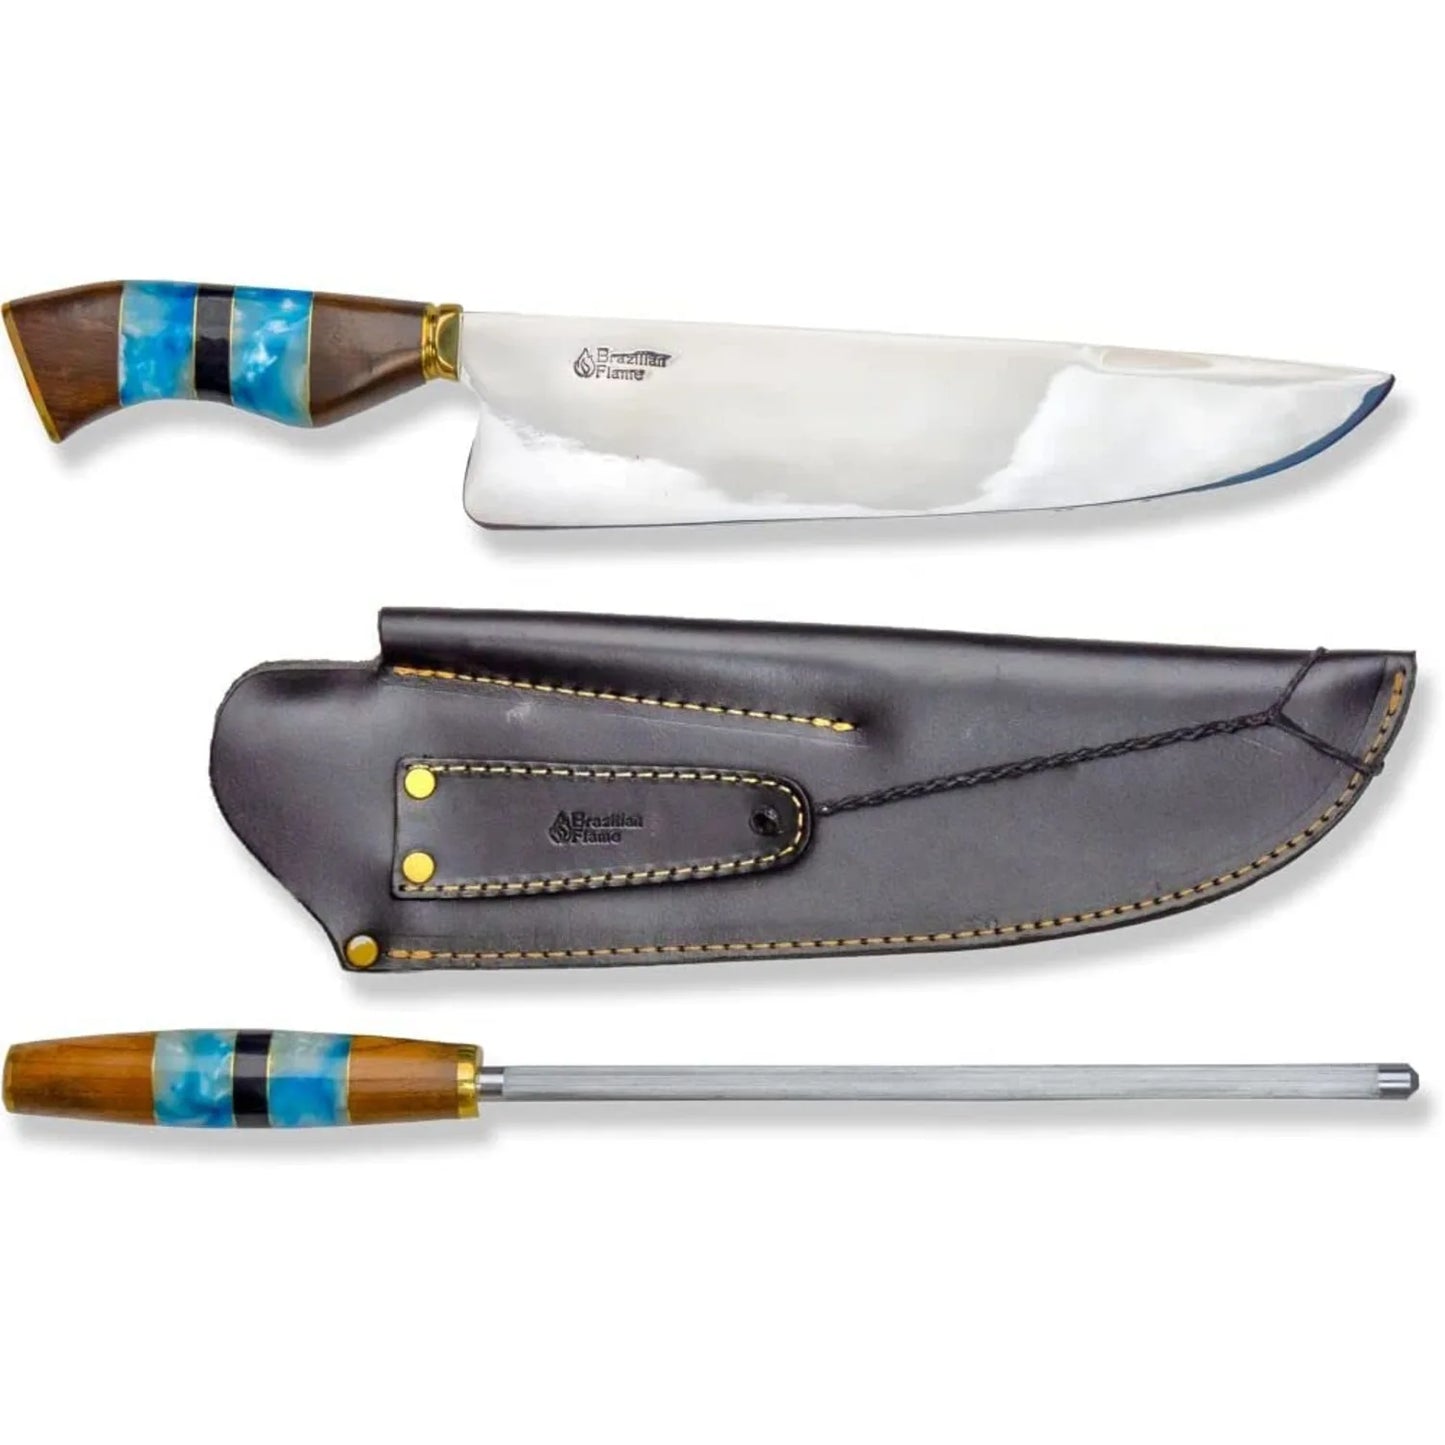 Brazilian Flame Chef's Knife - Picanha Set with Sharpener